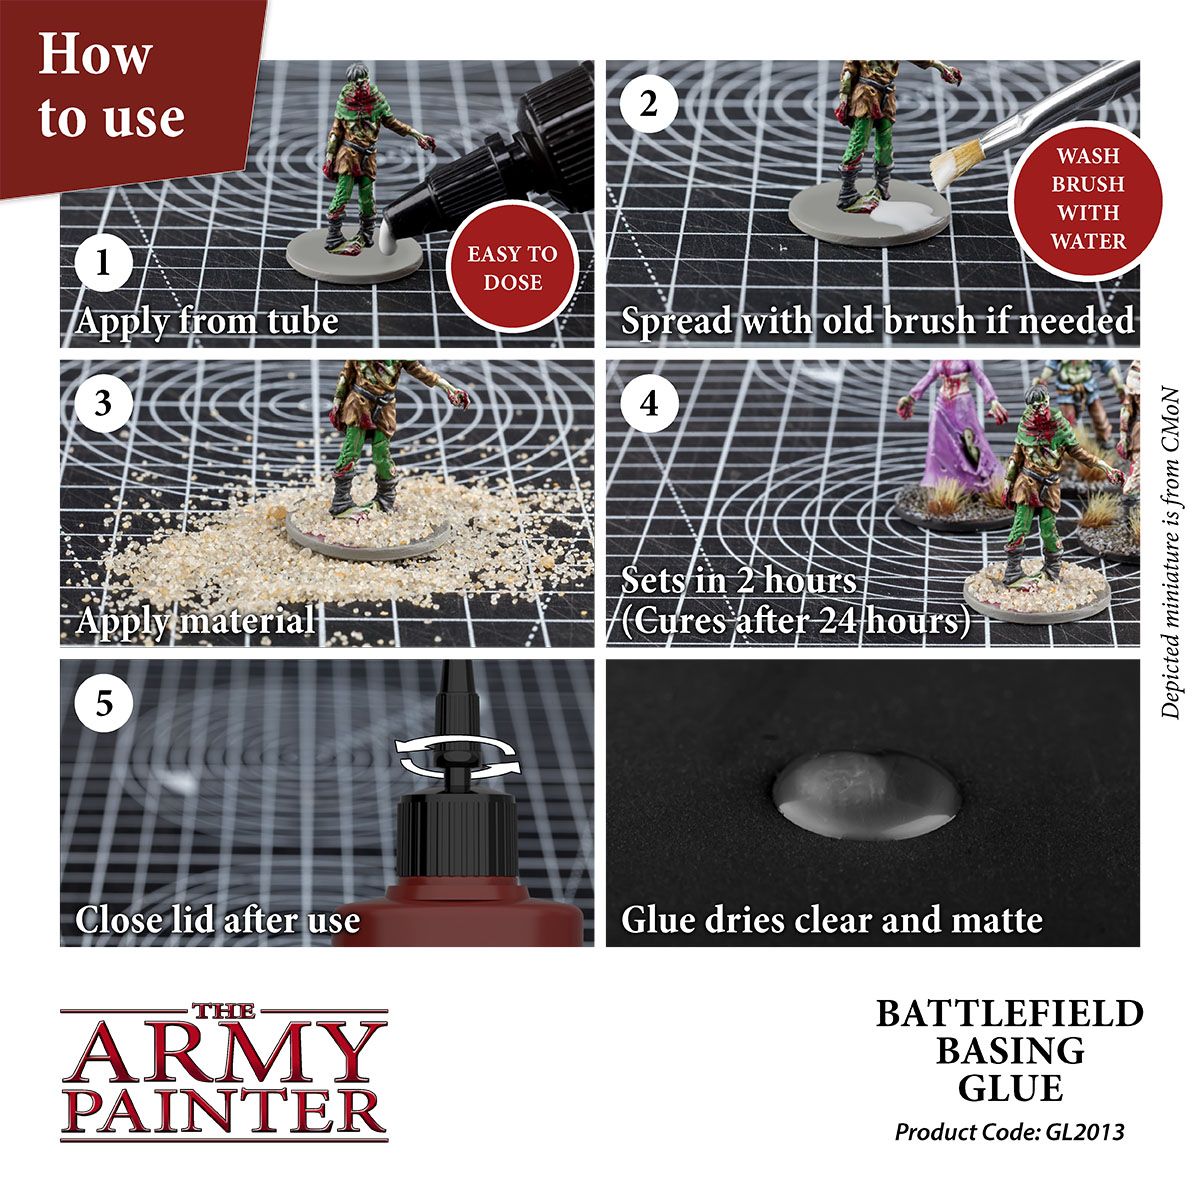 Battlefield Basing Glue (The Army Painter)